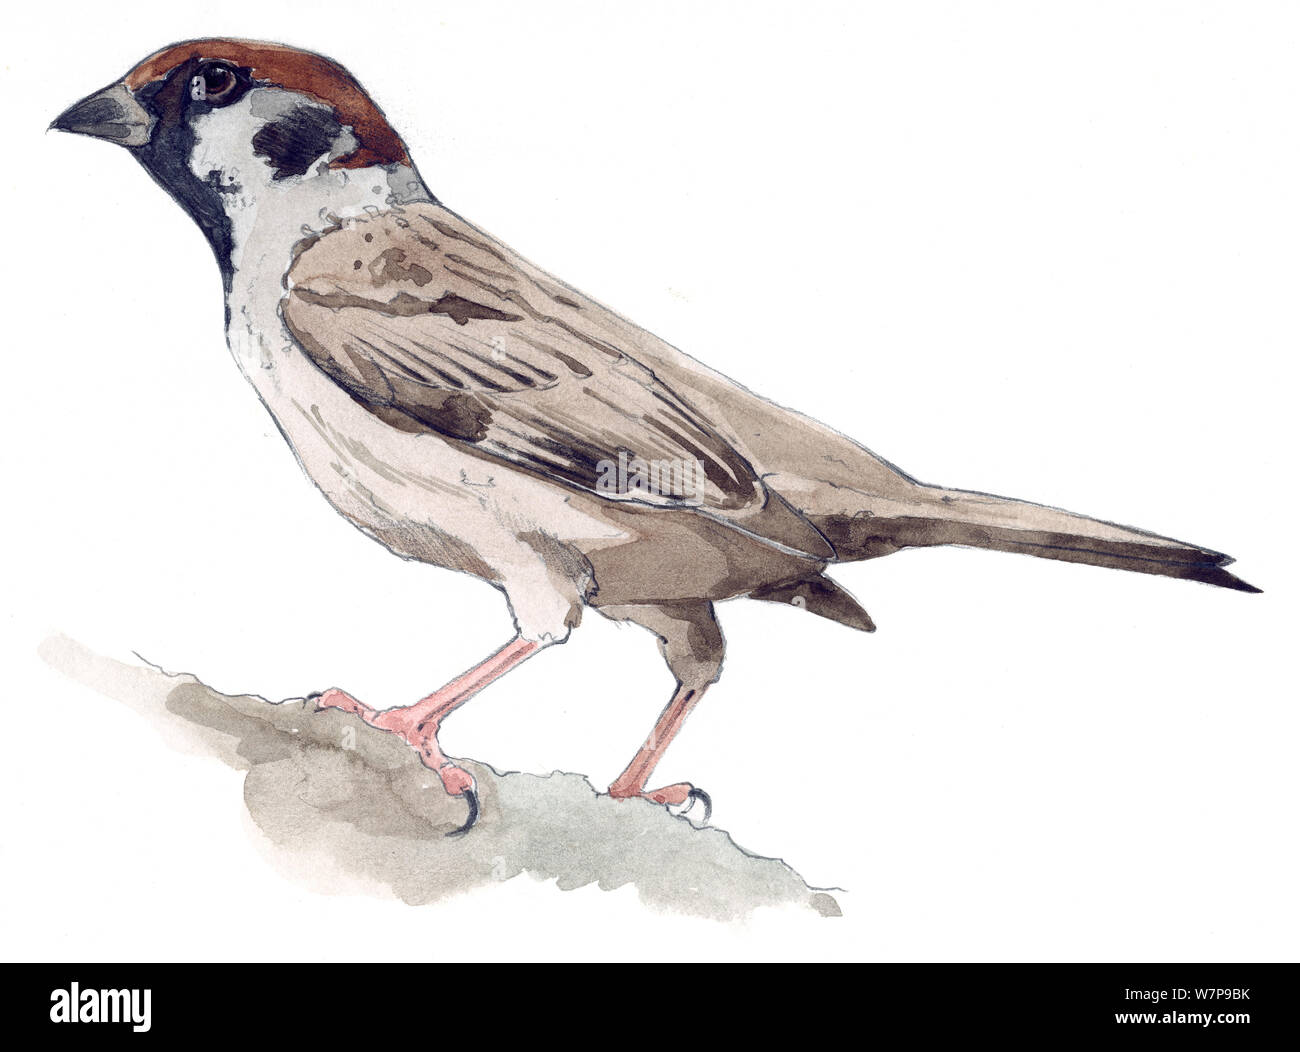 Illustration of Eurasian Tree Sparrow (Passer montanus). Pencil and watercolor painting. Stock Photo